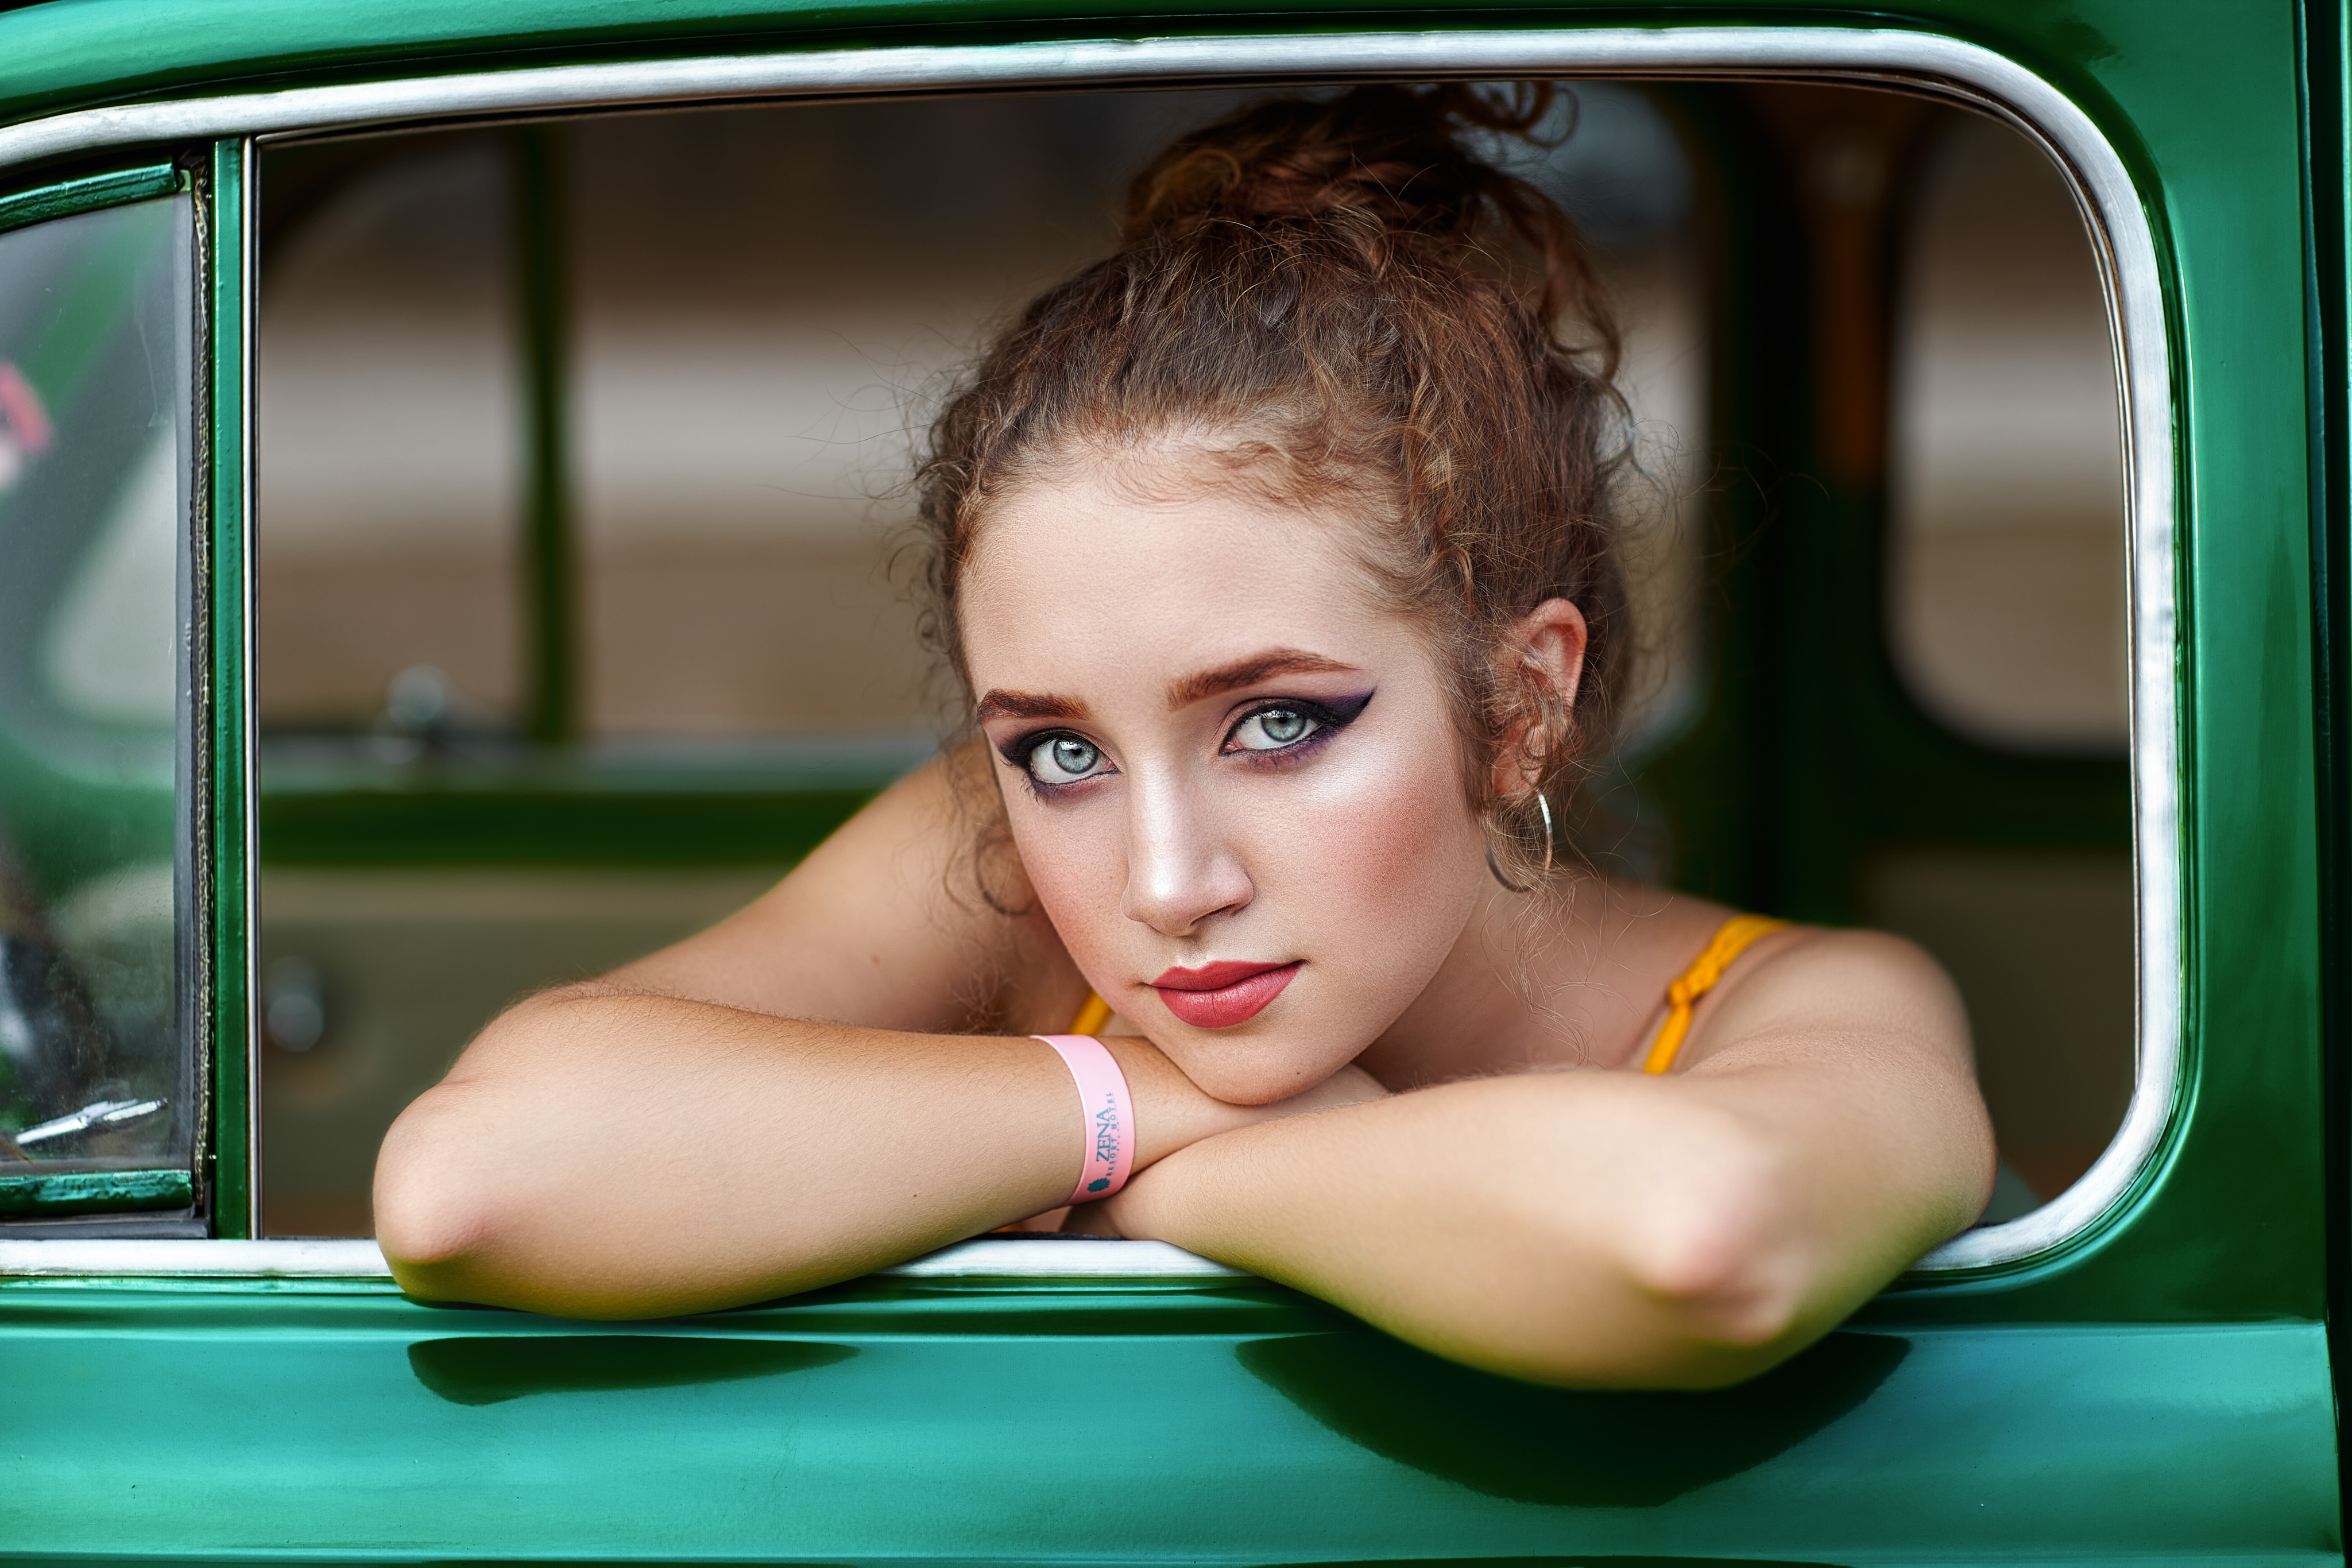 Looking At Viewer Women With Cars Depth Of Field Red Lipstick Women Car 4096x2731